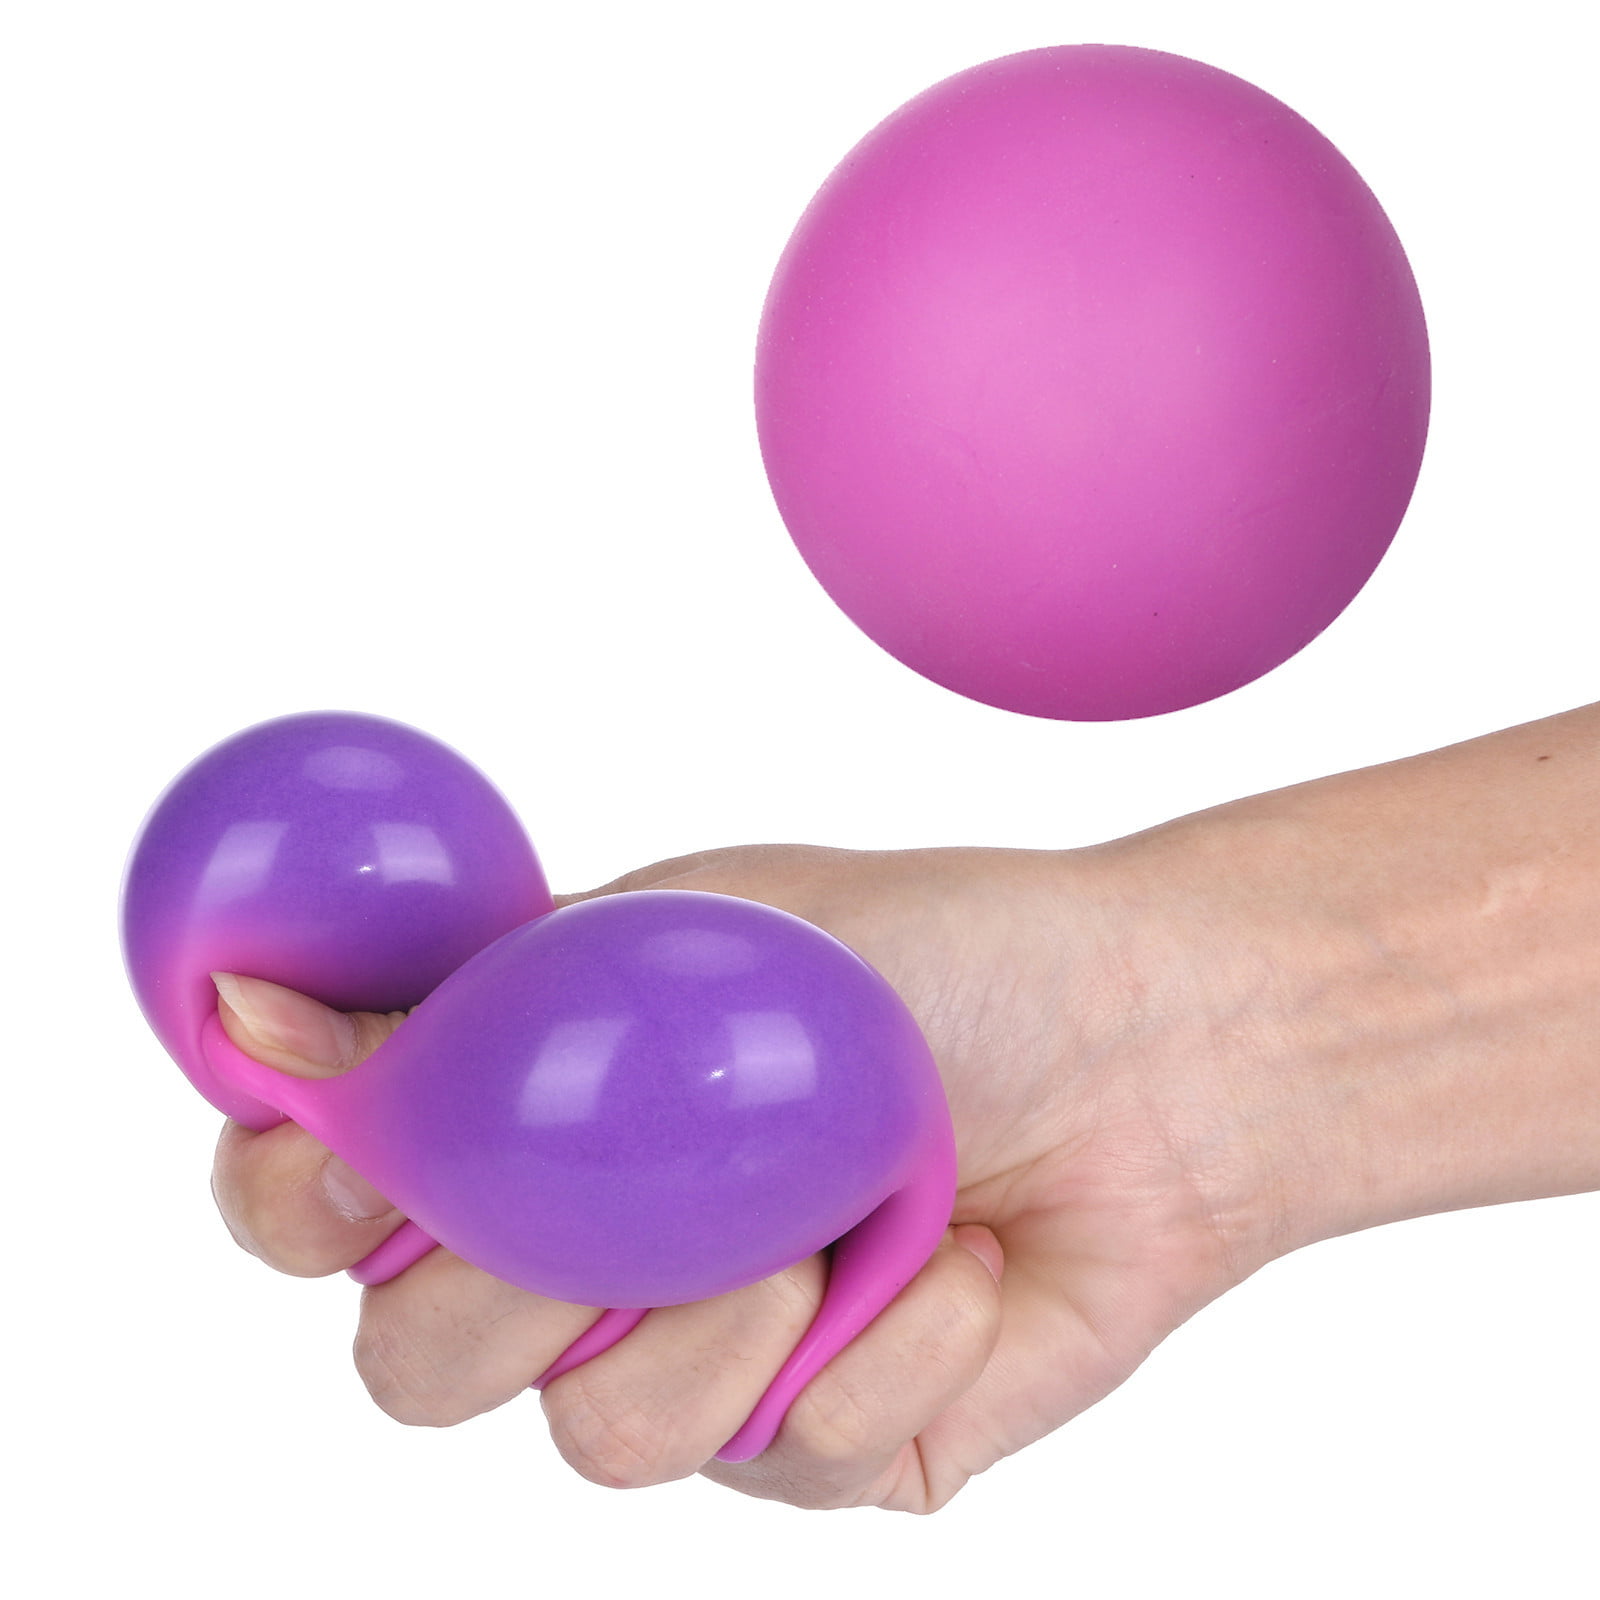 Creative Colorful Soft Novelty Hand Grip Pressure Ball B Sensory Fidget Relaxing Toy Stress Relief Change Colour Squeezing Balls for Kids and Adults Stress Relief Stress Balls Stress Squeeze Ball 